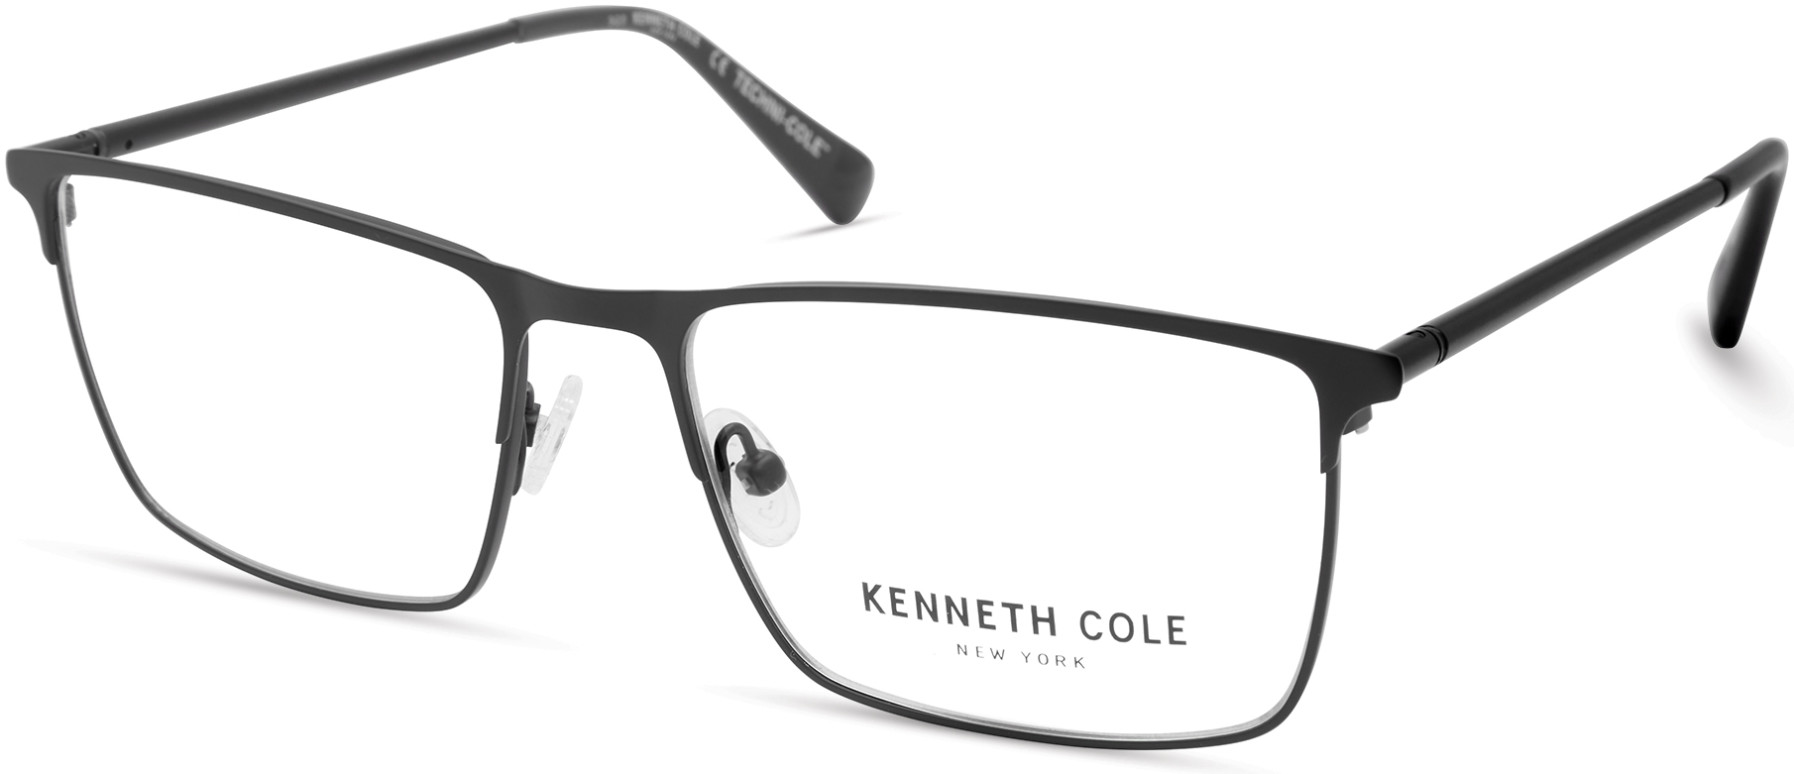 KENNETH COLE NY 0323 002